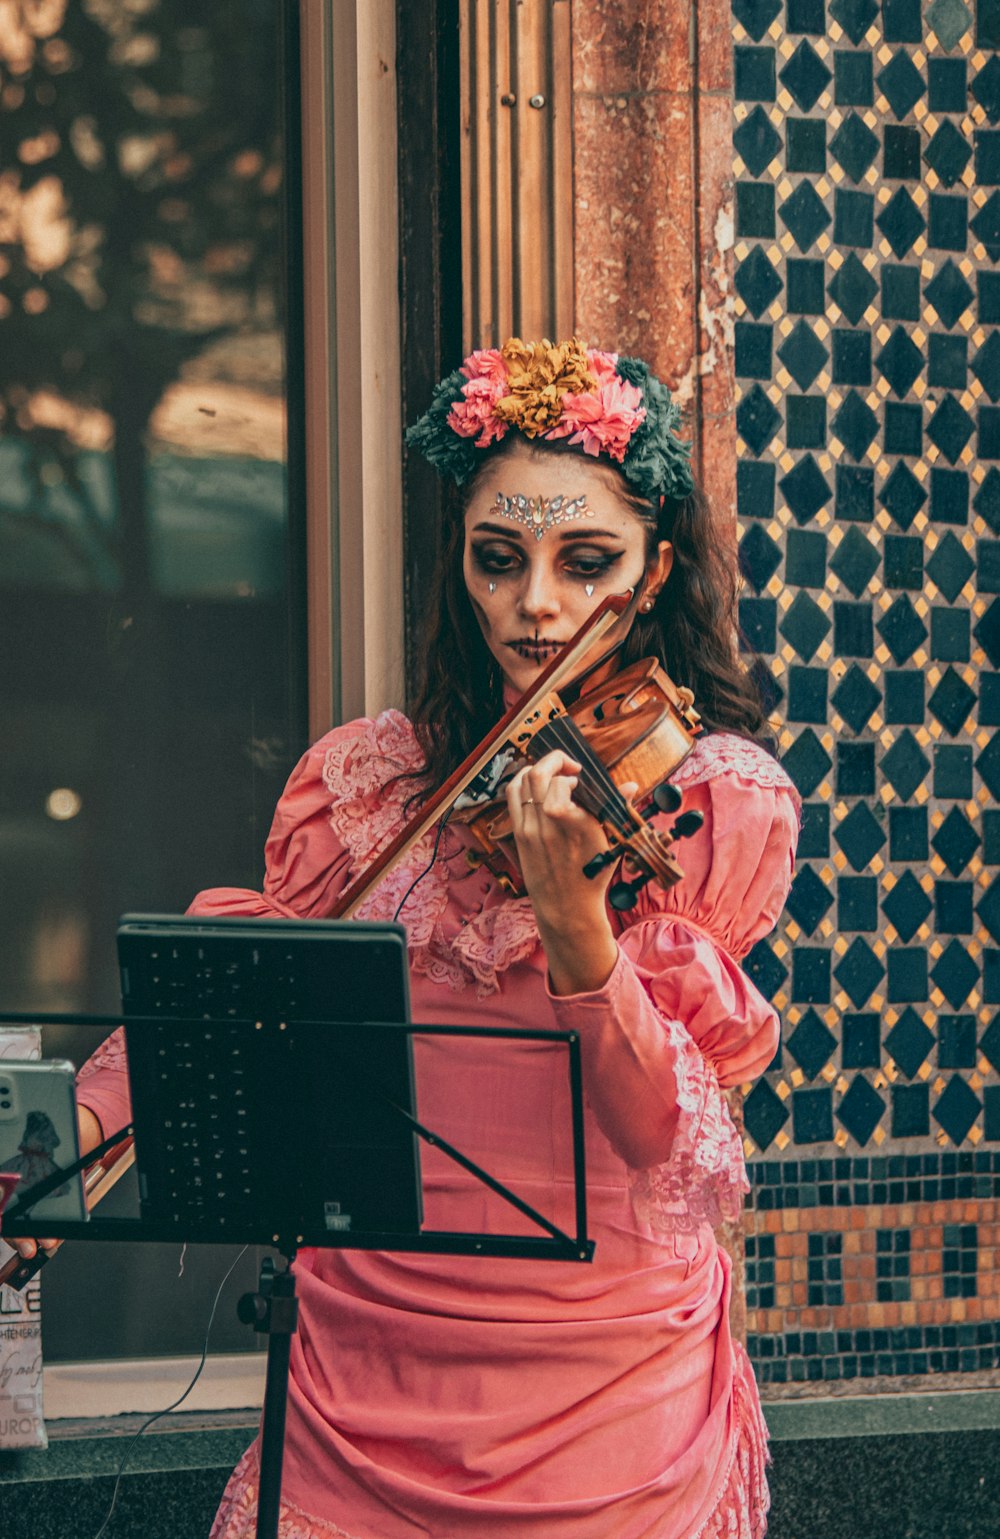 a woman in a pink dress playing a violin